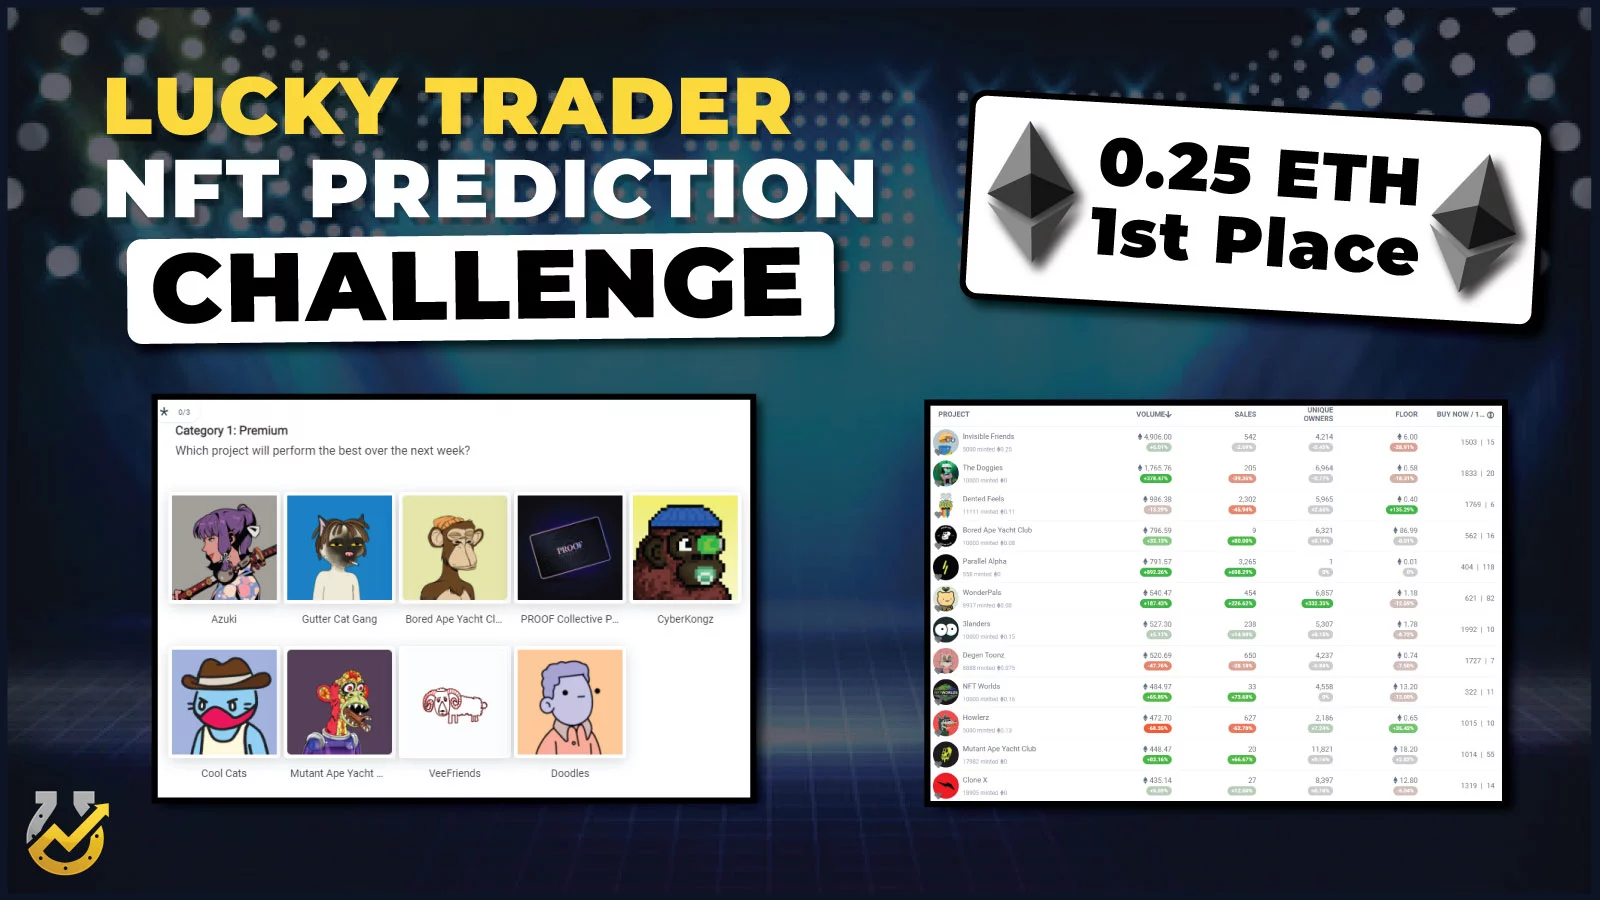 Introducing the Lucky Trader Price Prediction Challenge